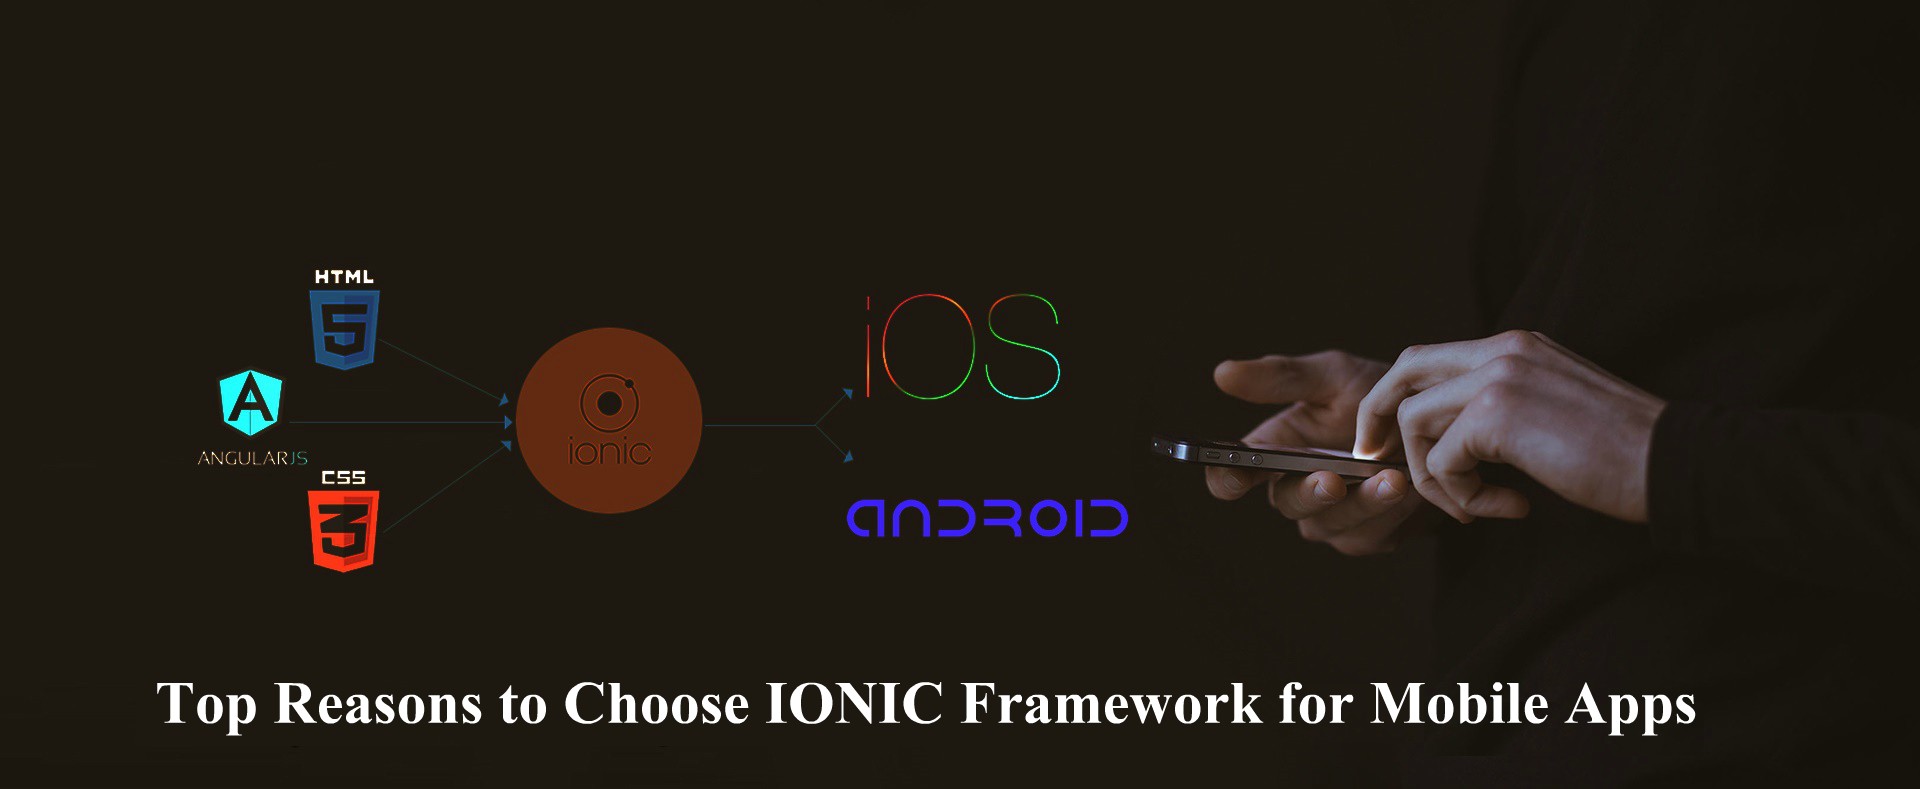 Top Reasons to Choose IONIC Framework for Mobile Apps